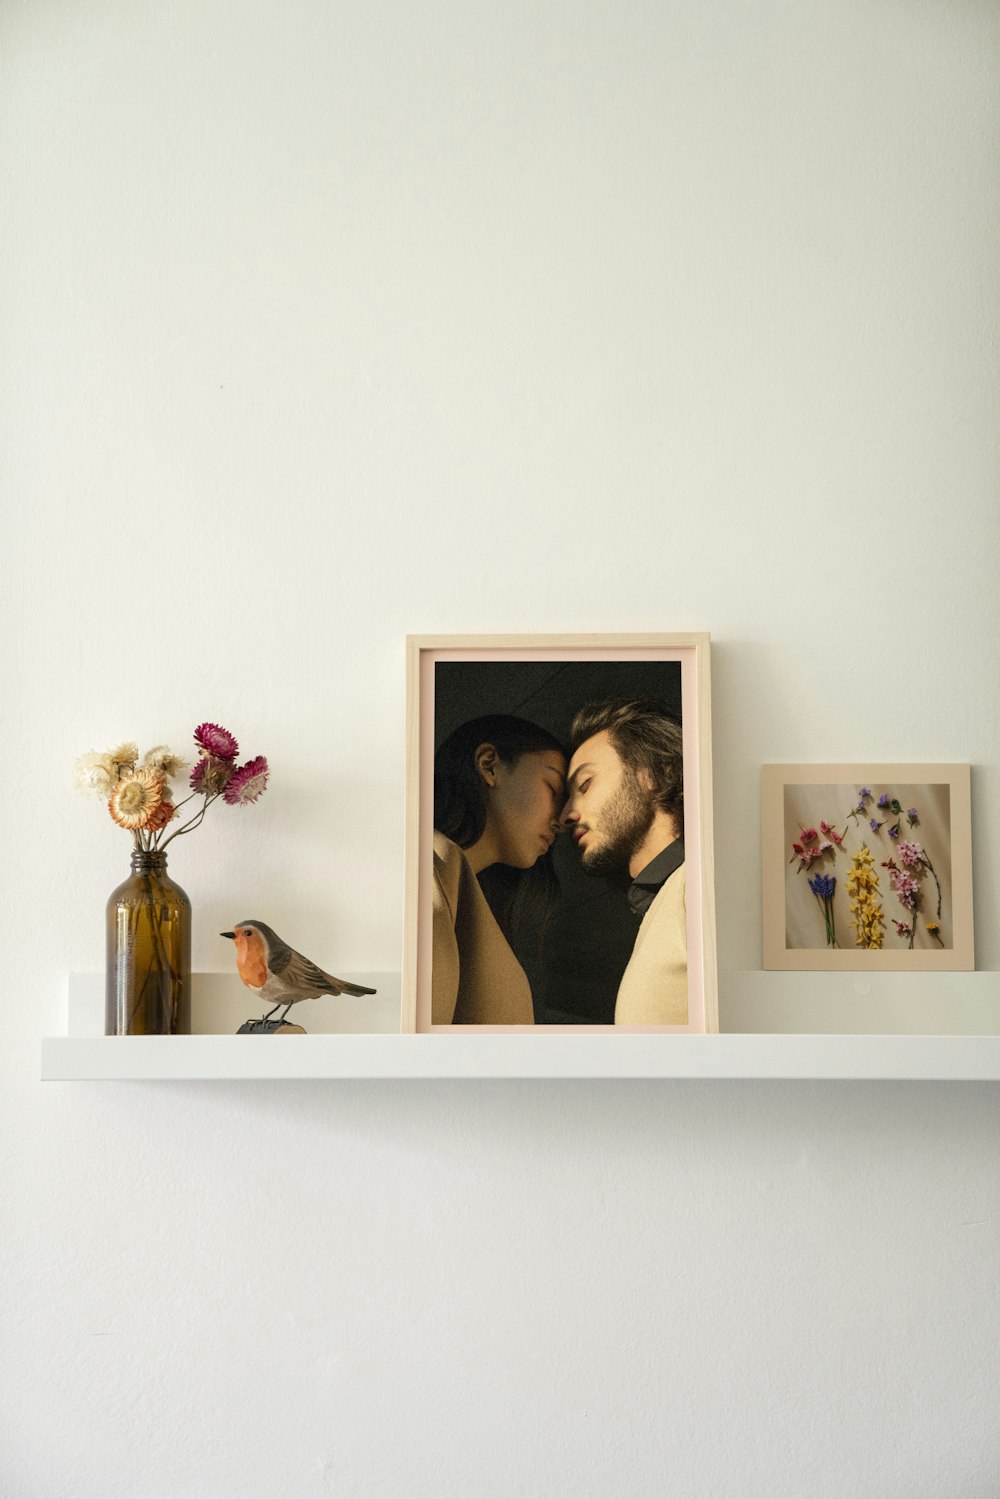 a shelf with a picture of two people and a vase of flowers